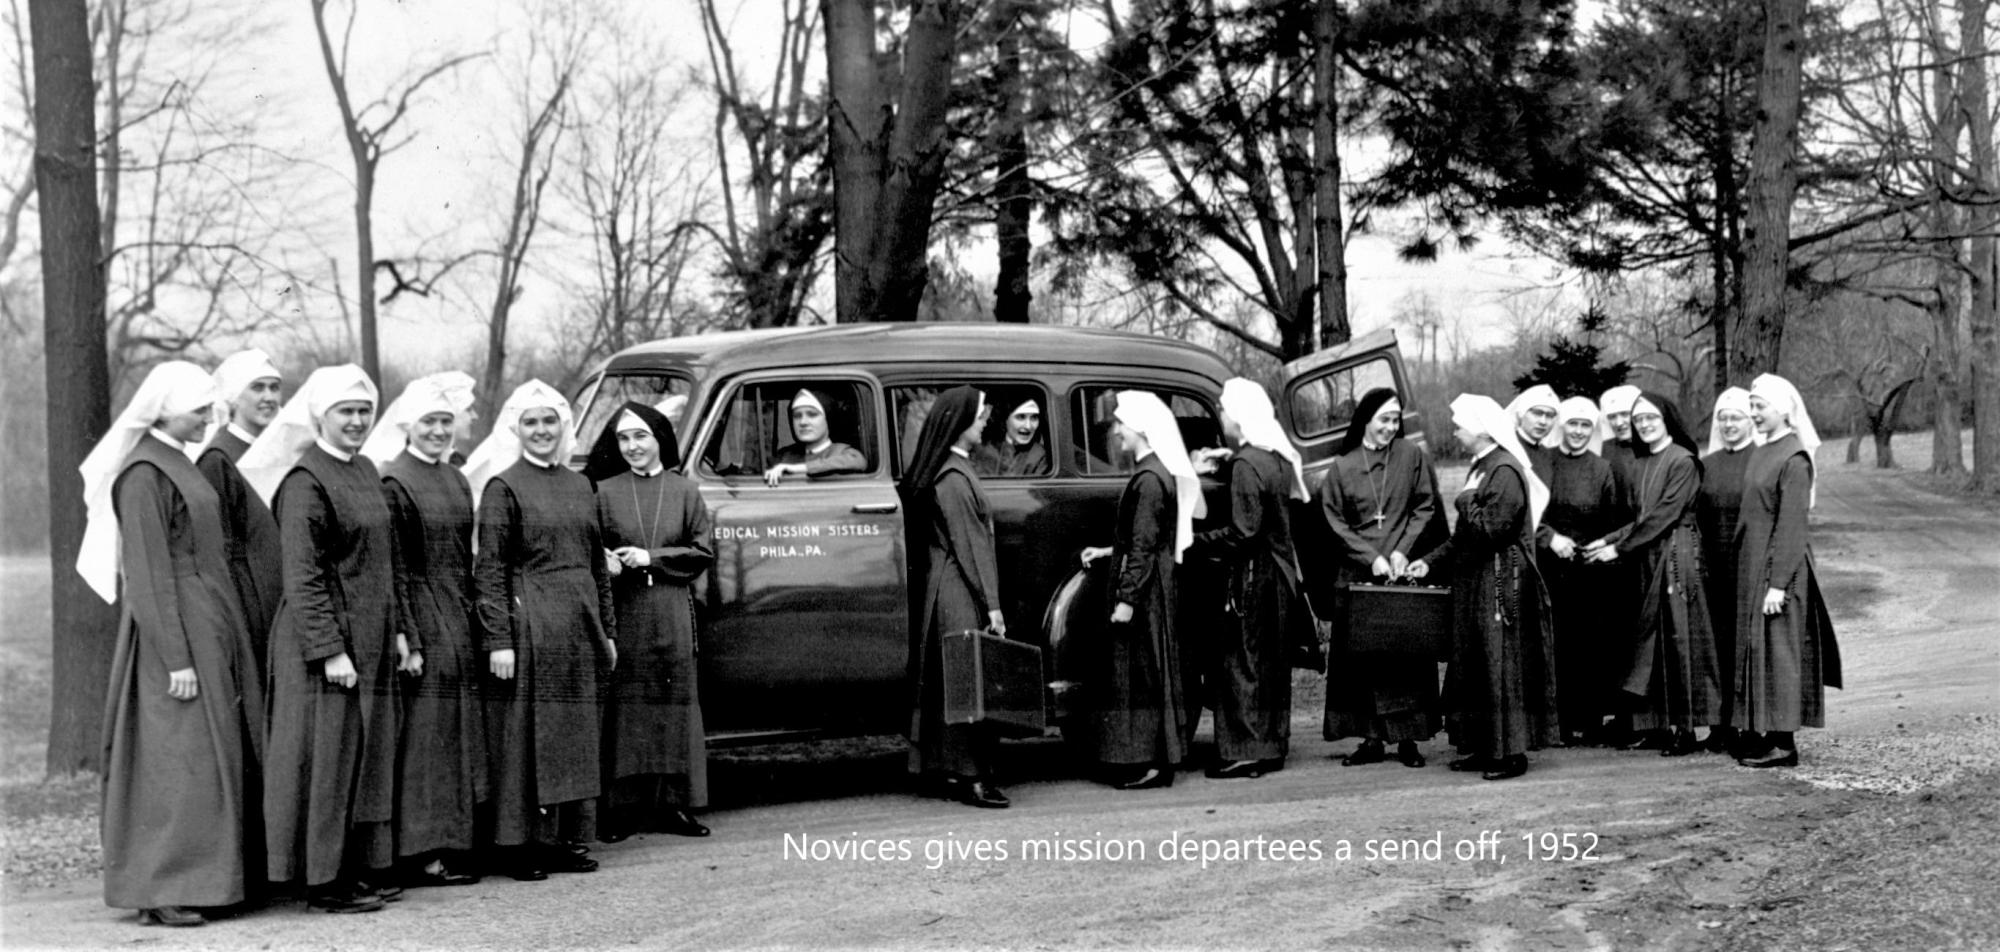 Novices give mission departees a send-off in 1952